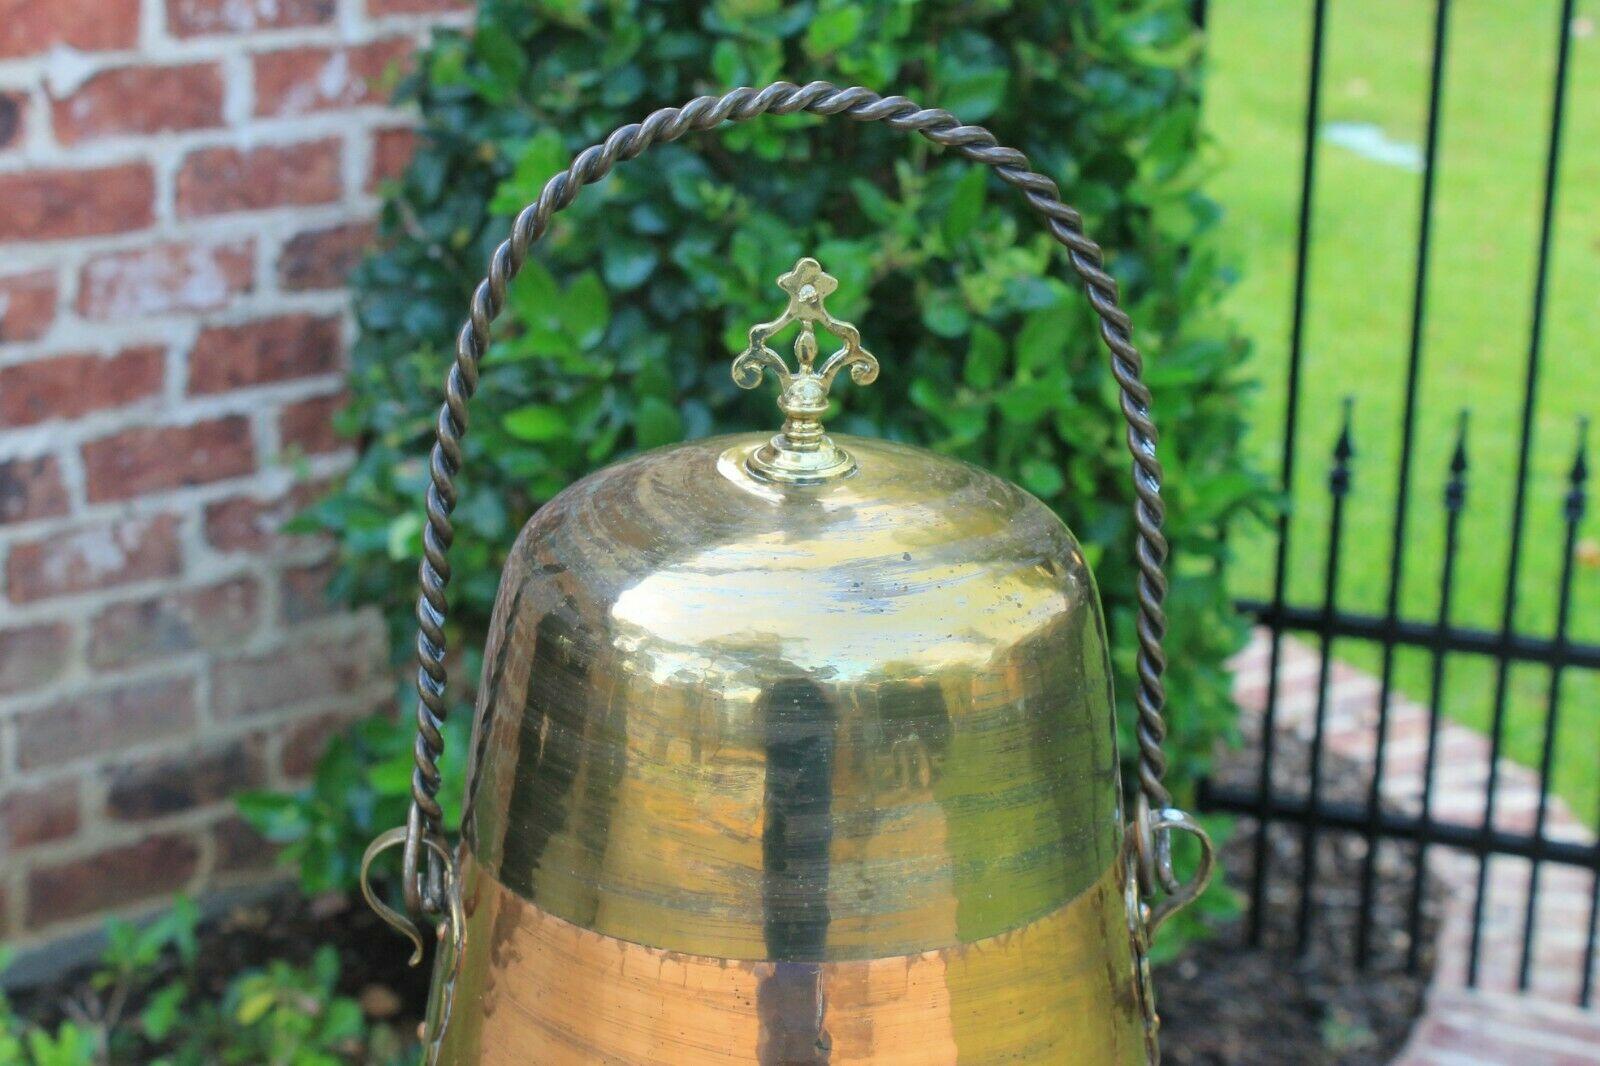 French Provincial Antique French Copper & Brass Jug Vessel with Lid & Handle Hand Seamed 19th C